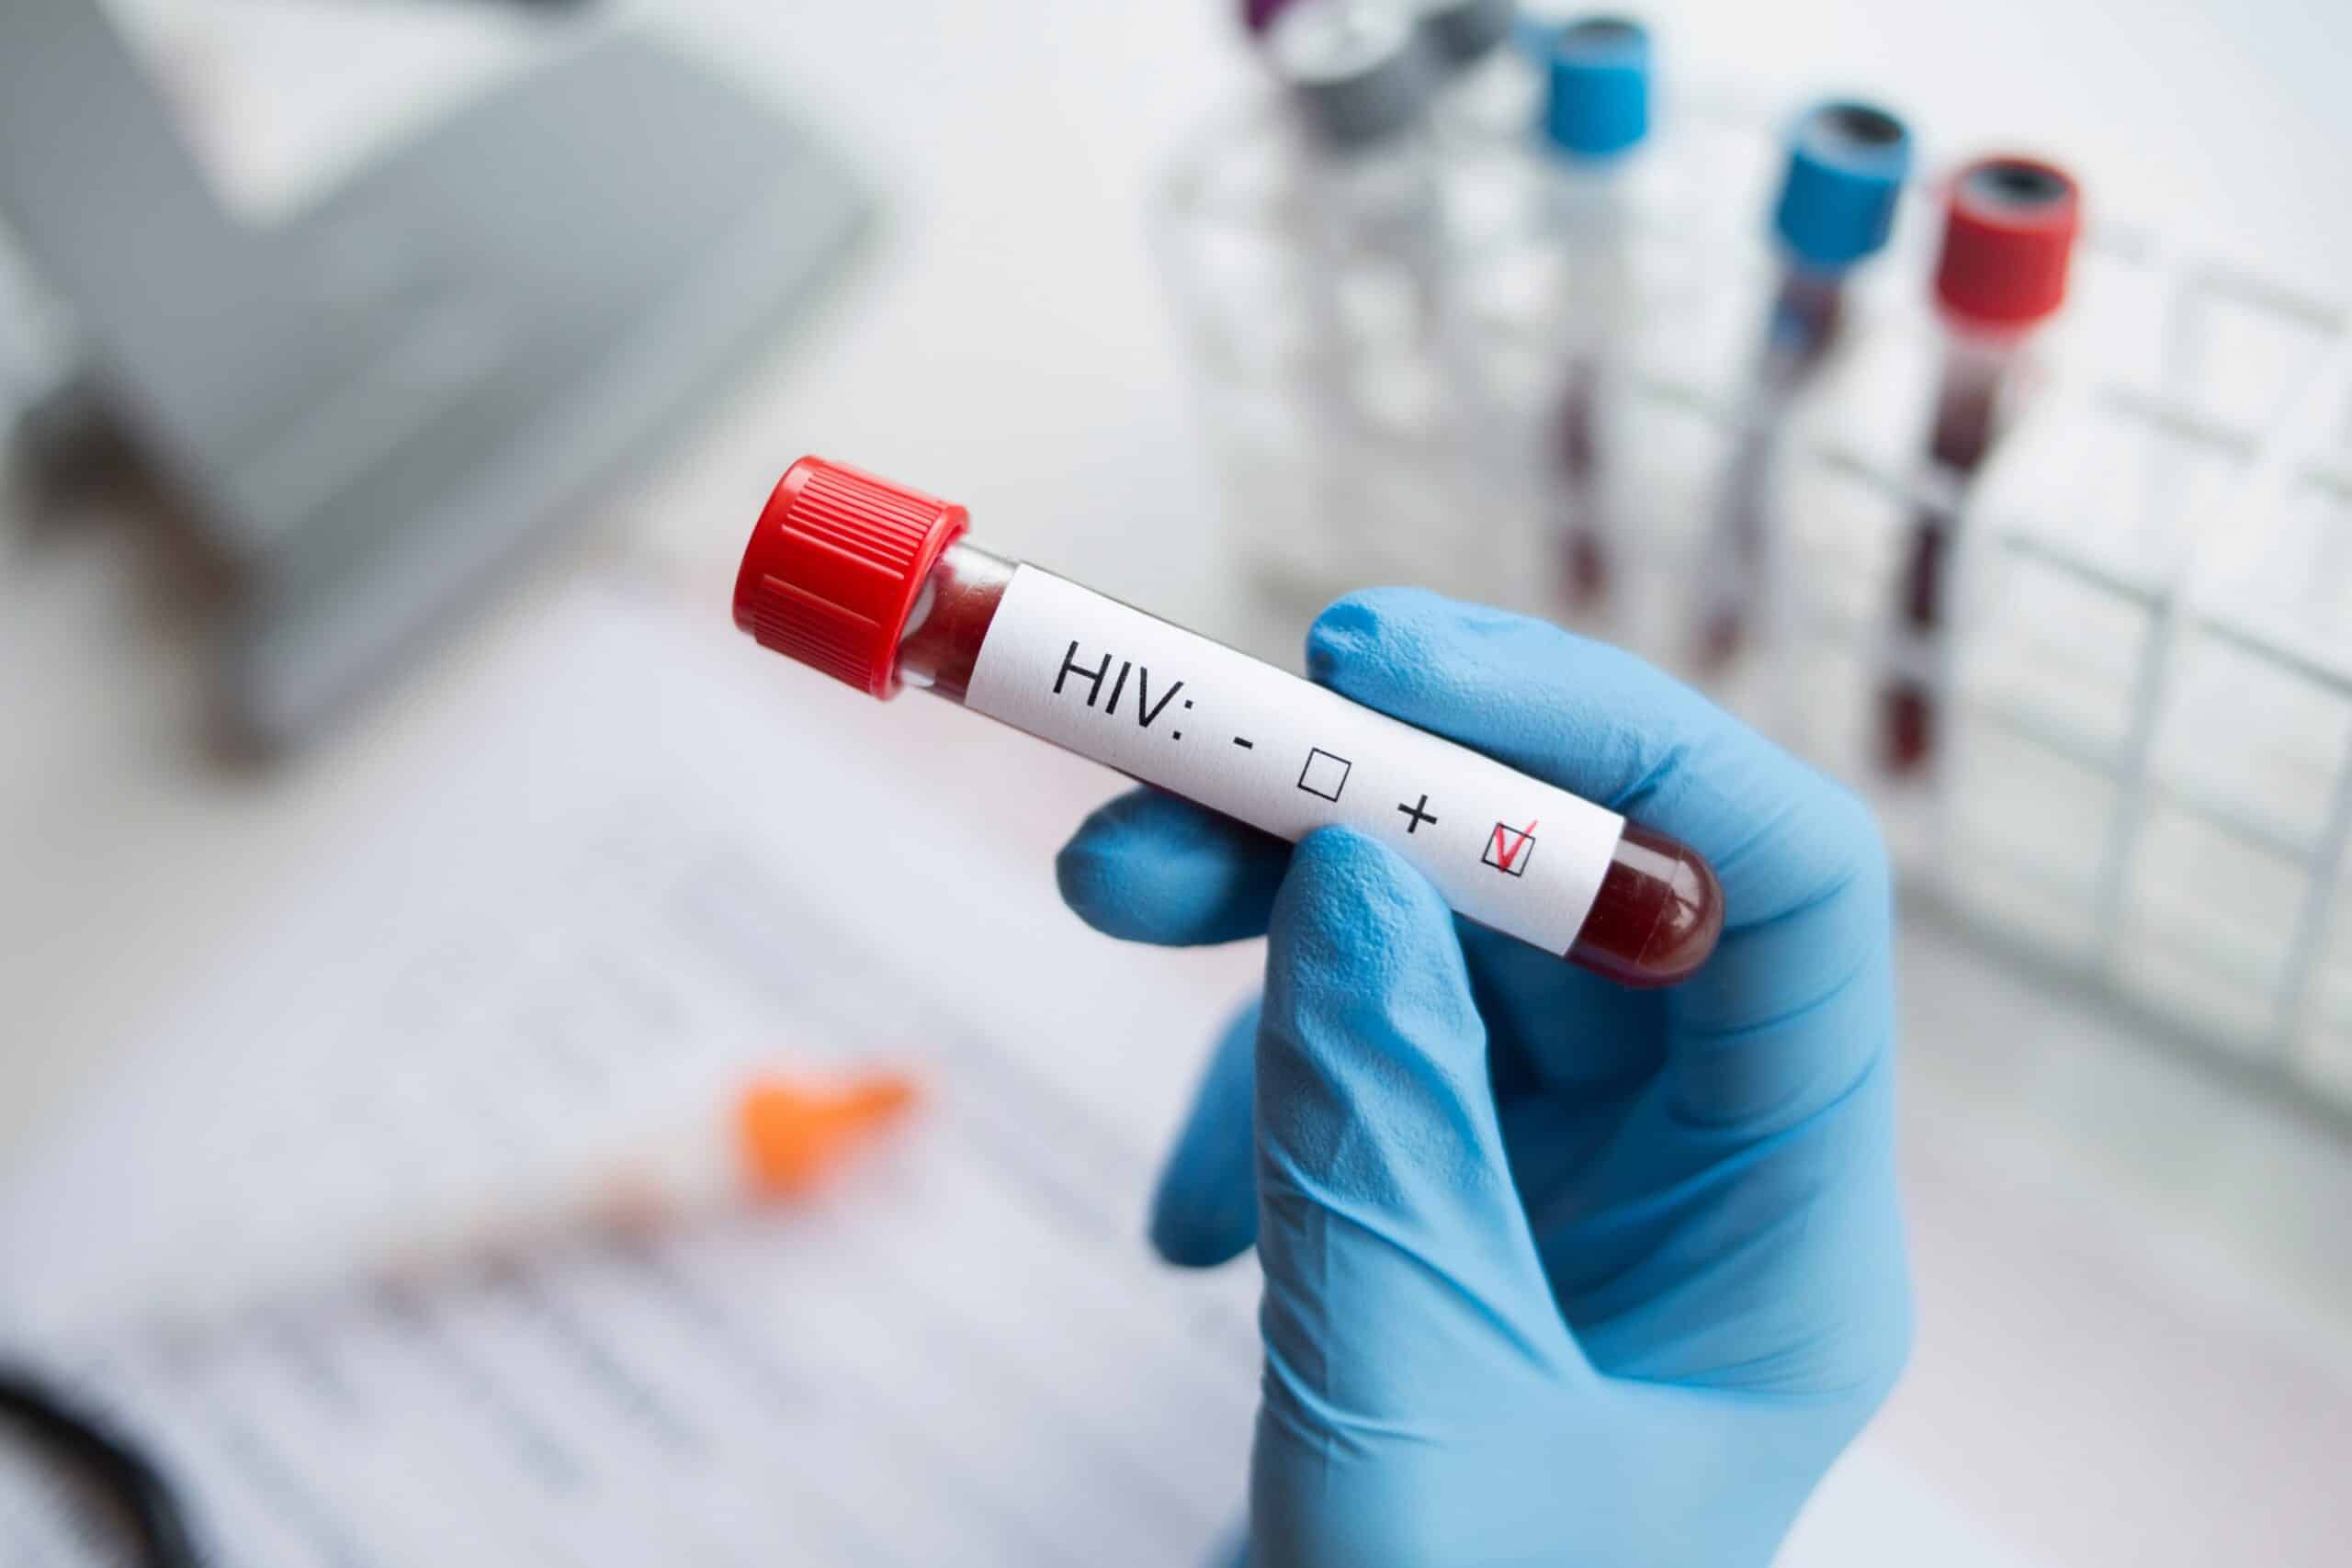 A 60-year-old German man is likely the seventh person to be effectively cured from HIV after receiving a stem cell transplant, doctors announced on Thursday.